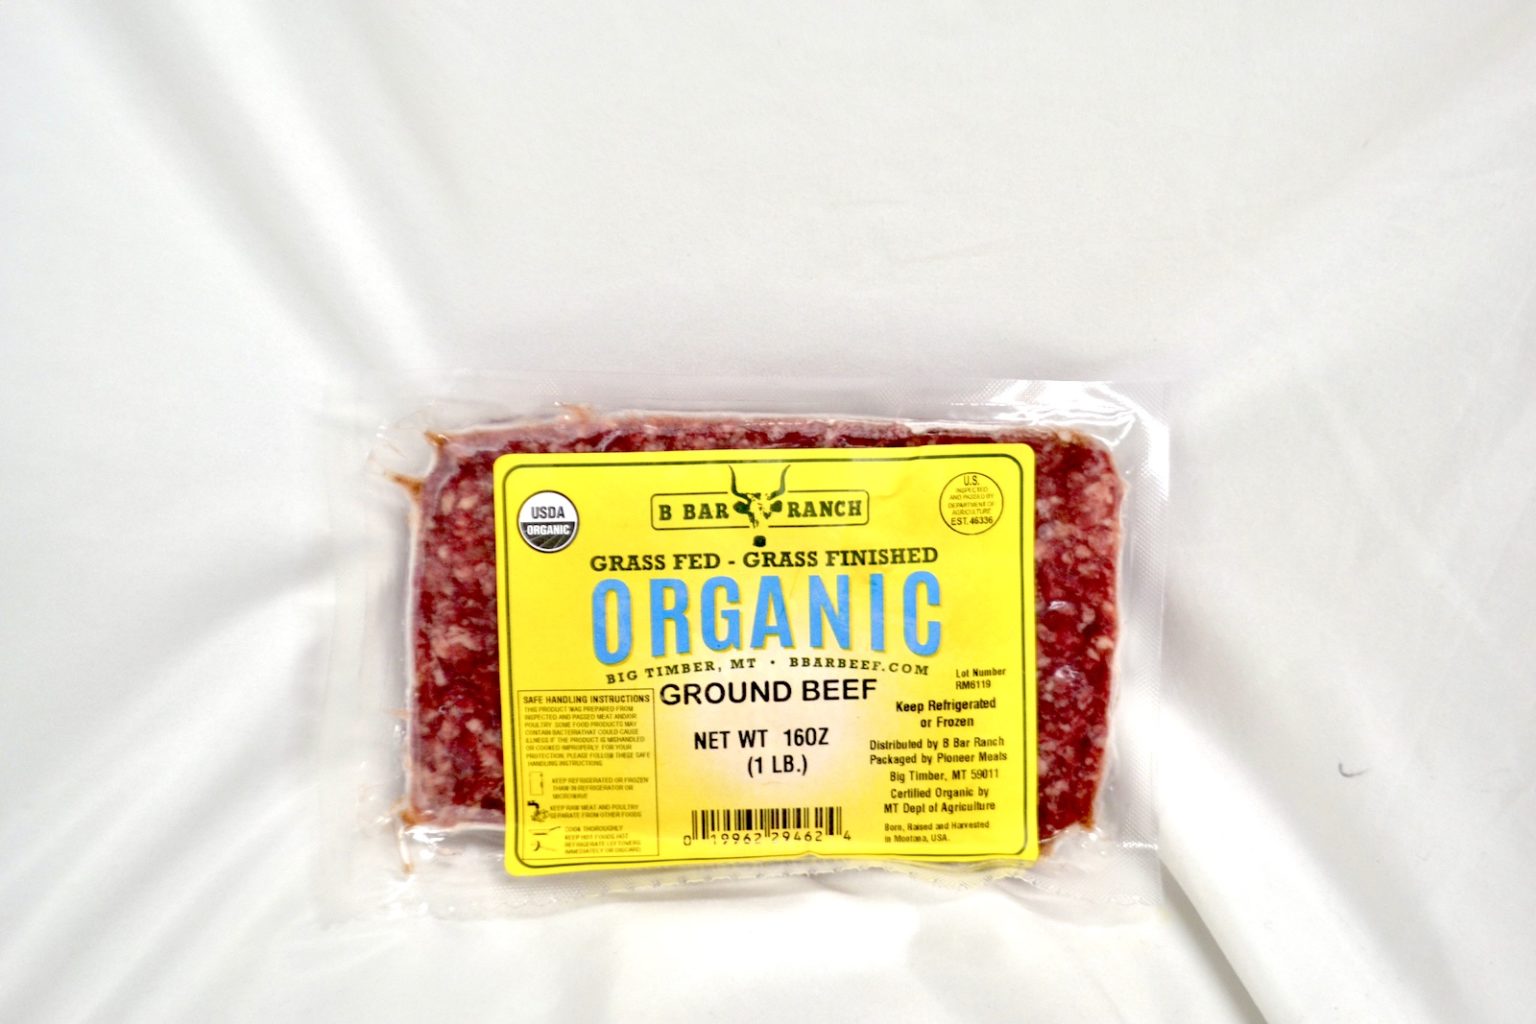 B Bar Organic Grass Fed Ground Beef 1 Lb Earth Wise General Store